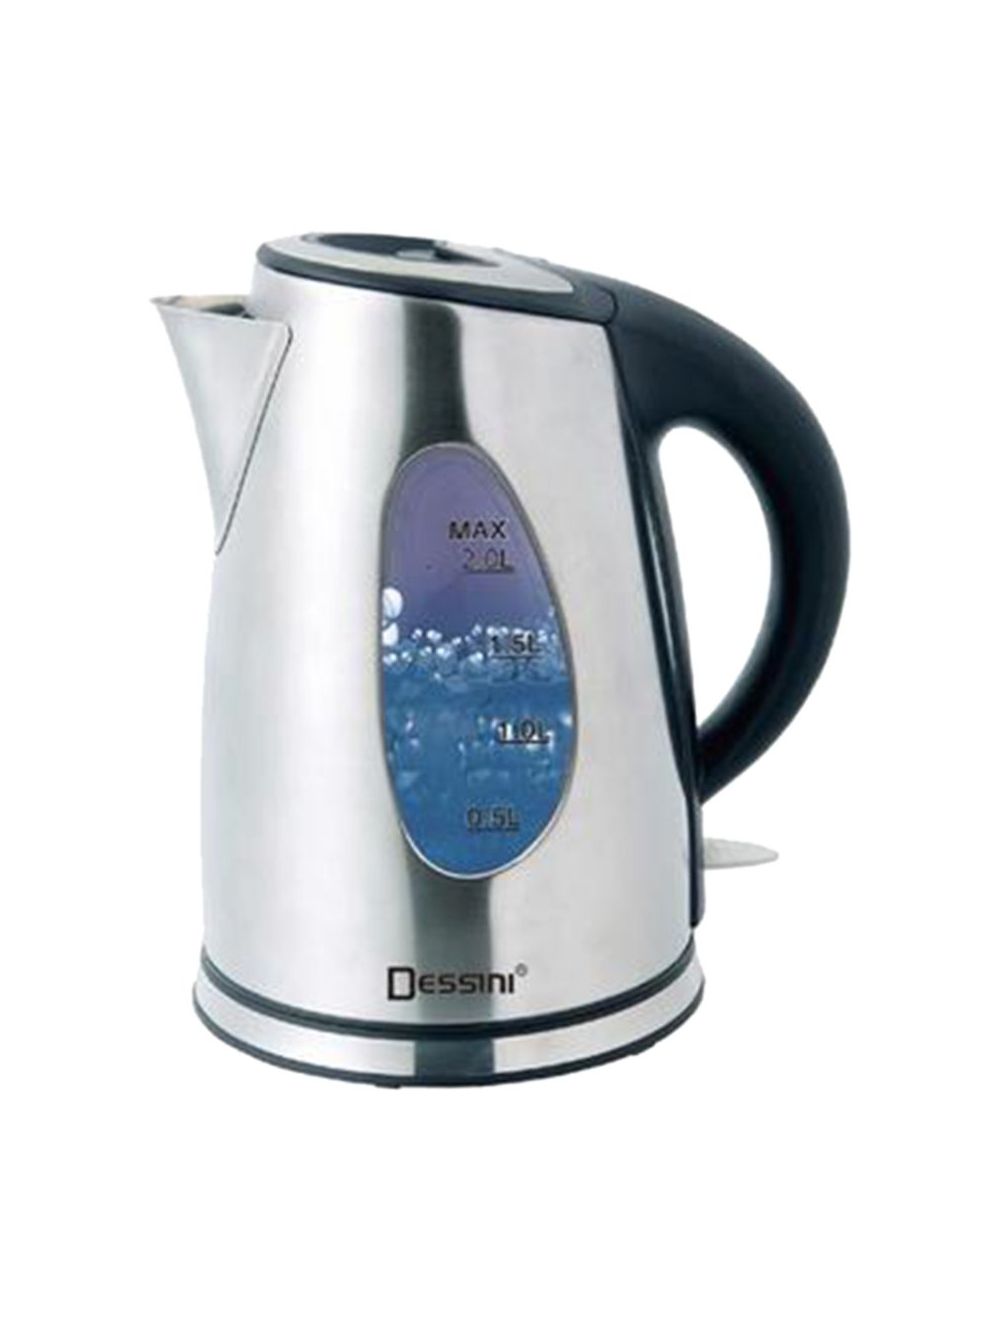 Dessini Stainless Steel Electric Kettle-AKAT120